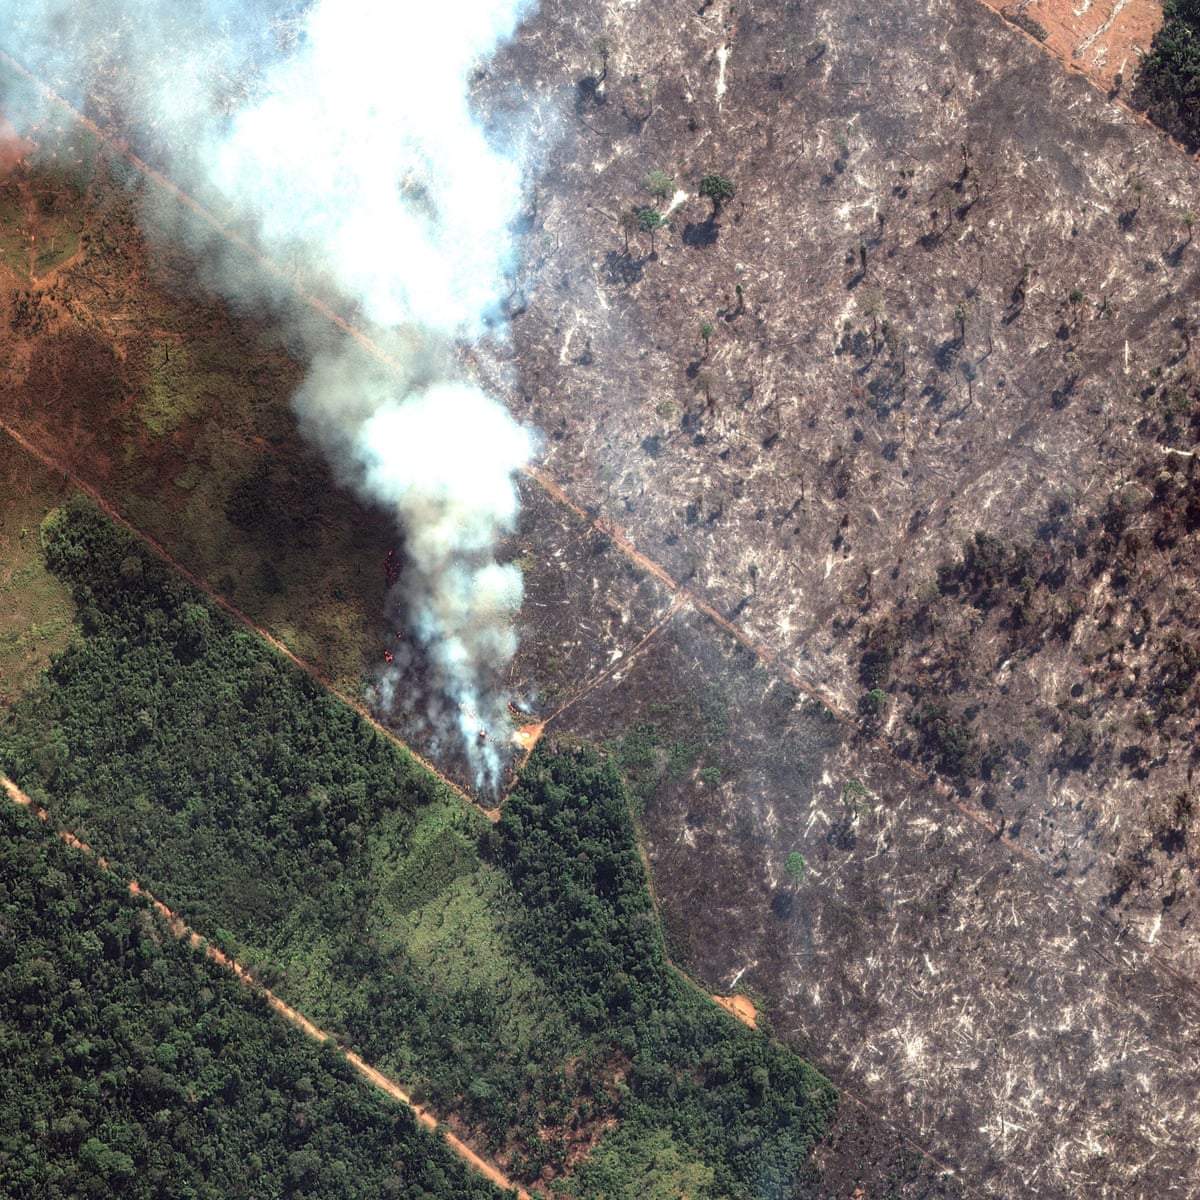 Amazon Fires What Is Happening And Is There Anything We Can Do Amazon Rainforest The Guardian